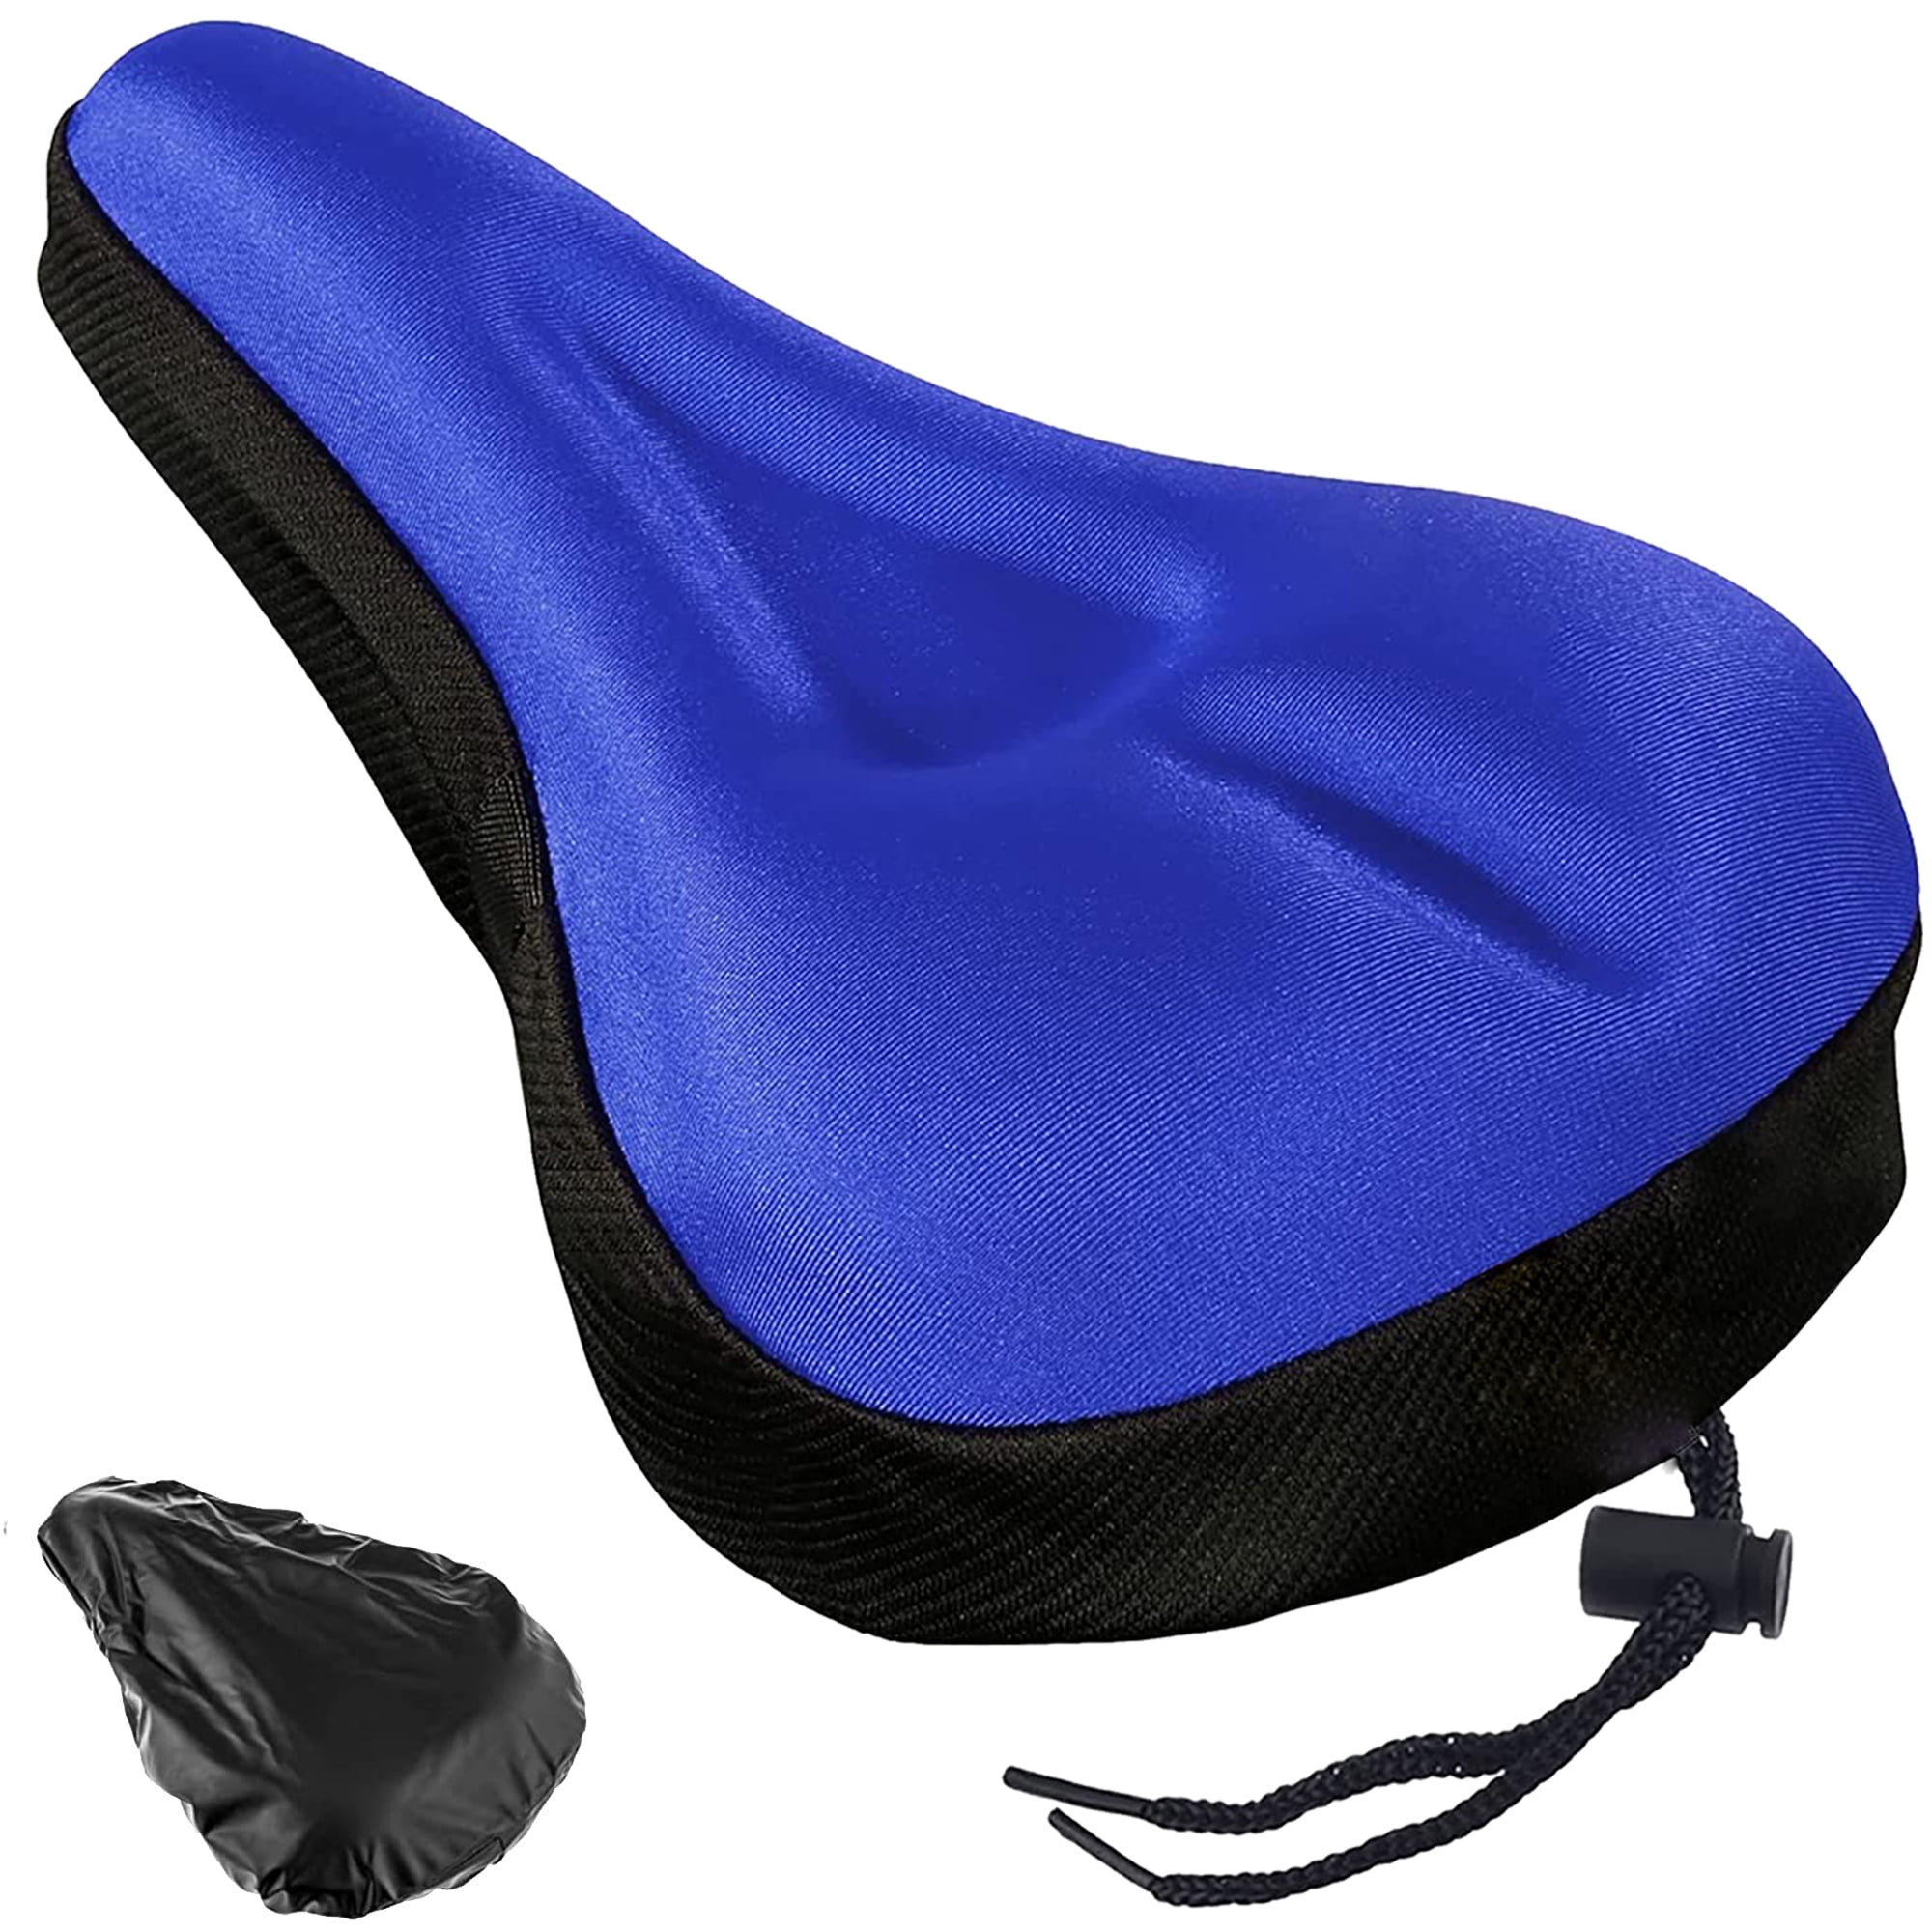 Stationary Bike Seat Cushion or Mountain Bike Saddle Water and Dust Resistant Cover Spin Bike Pedal To The Medal Gel Bike Seat Cover Extra Soft and Wide Gel Bicycle Seat Road Bike